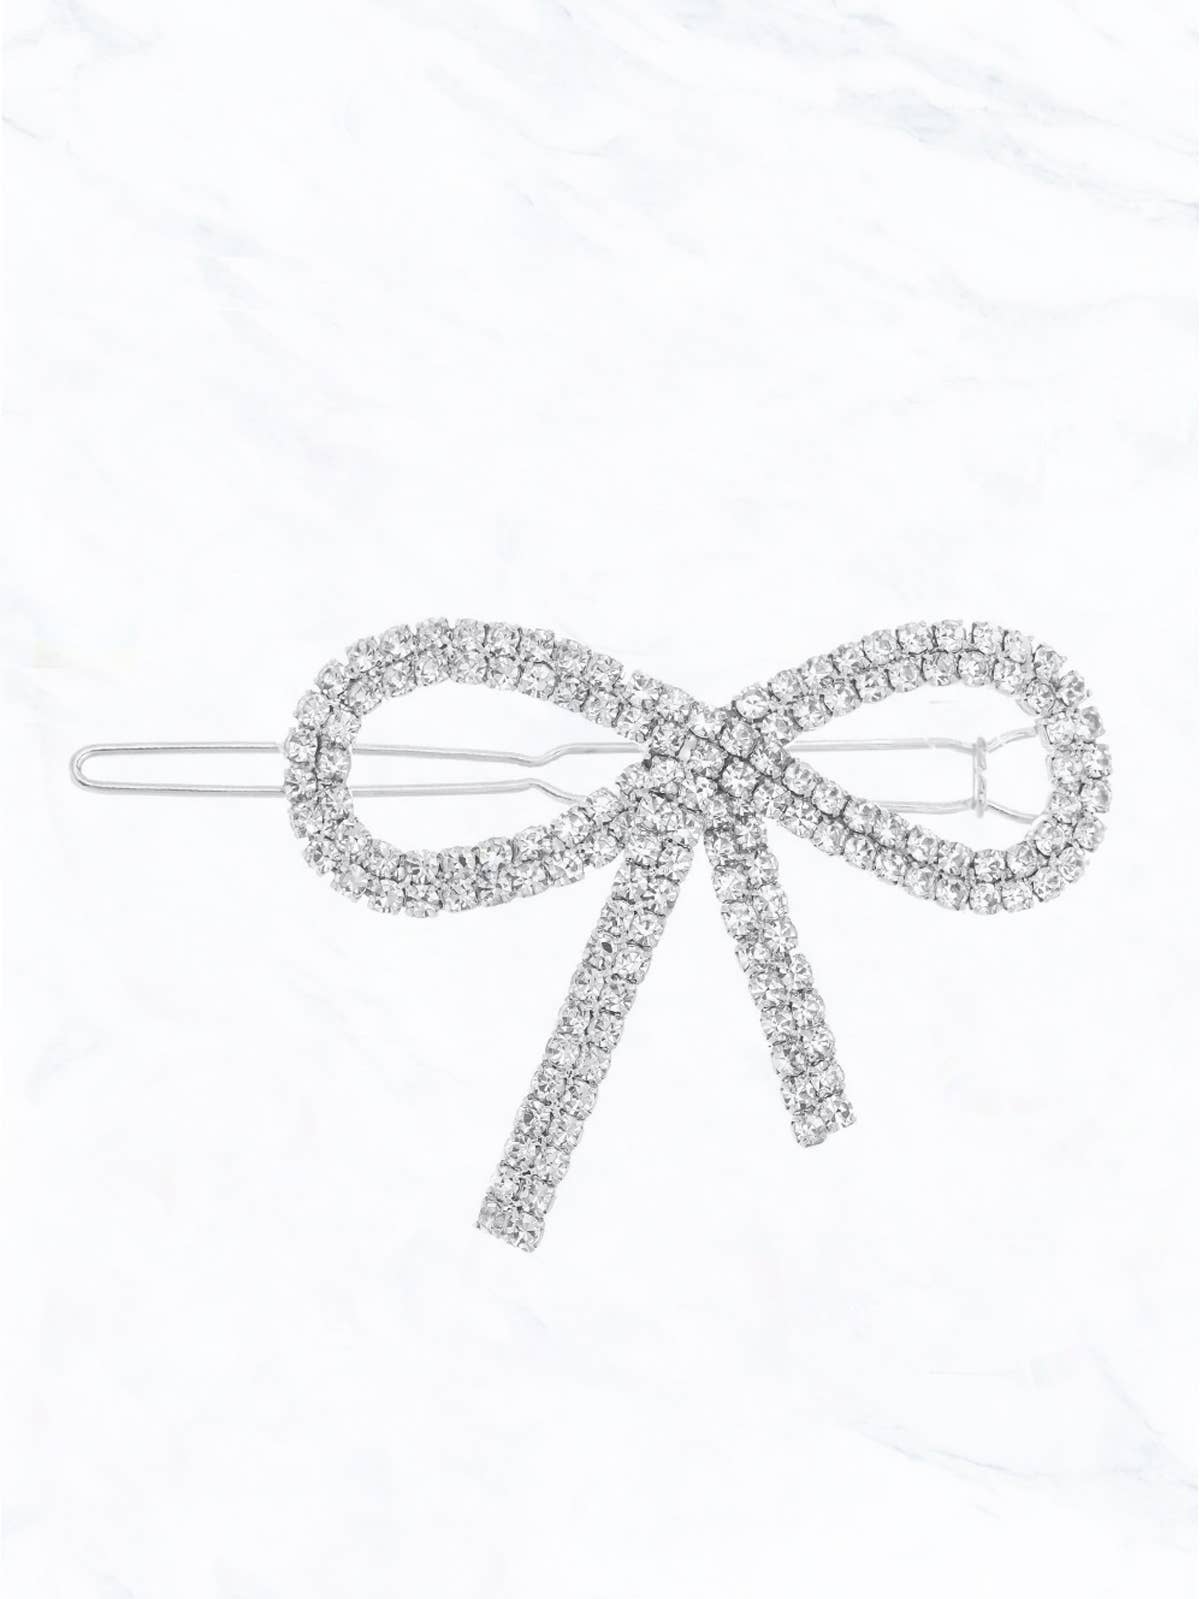 Silver metal barrette in the shape of a bow with clear rhinestone appliqués